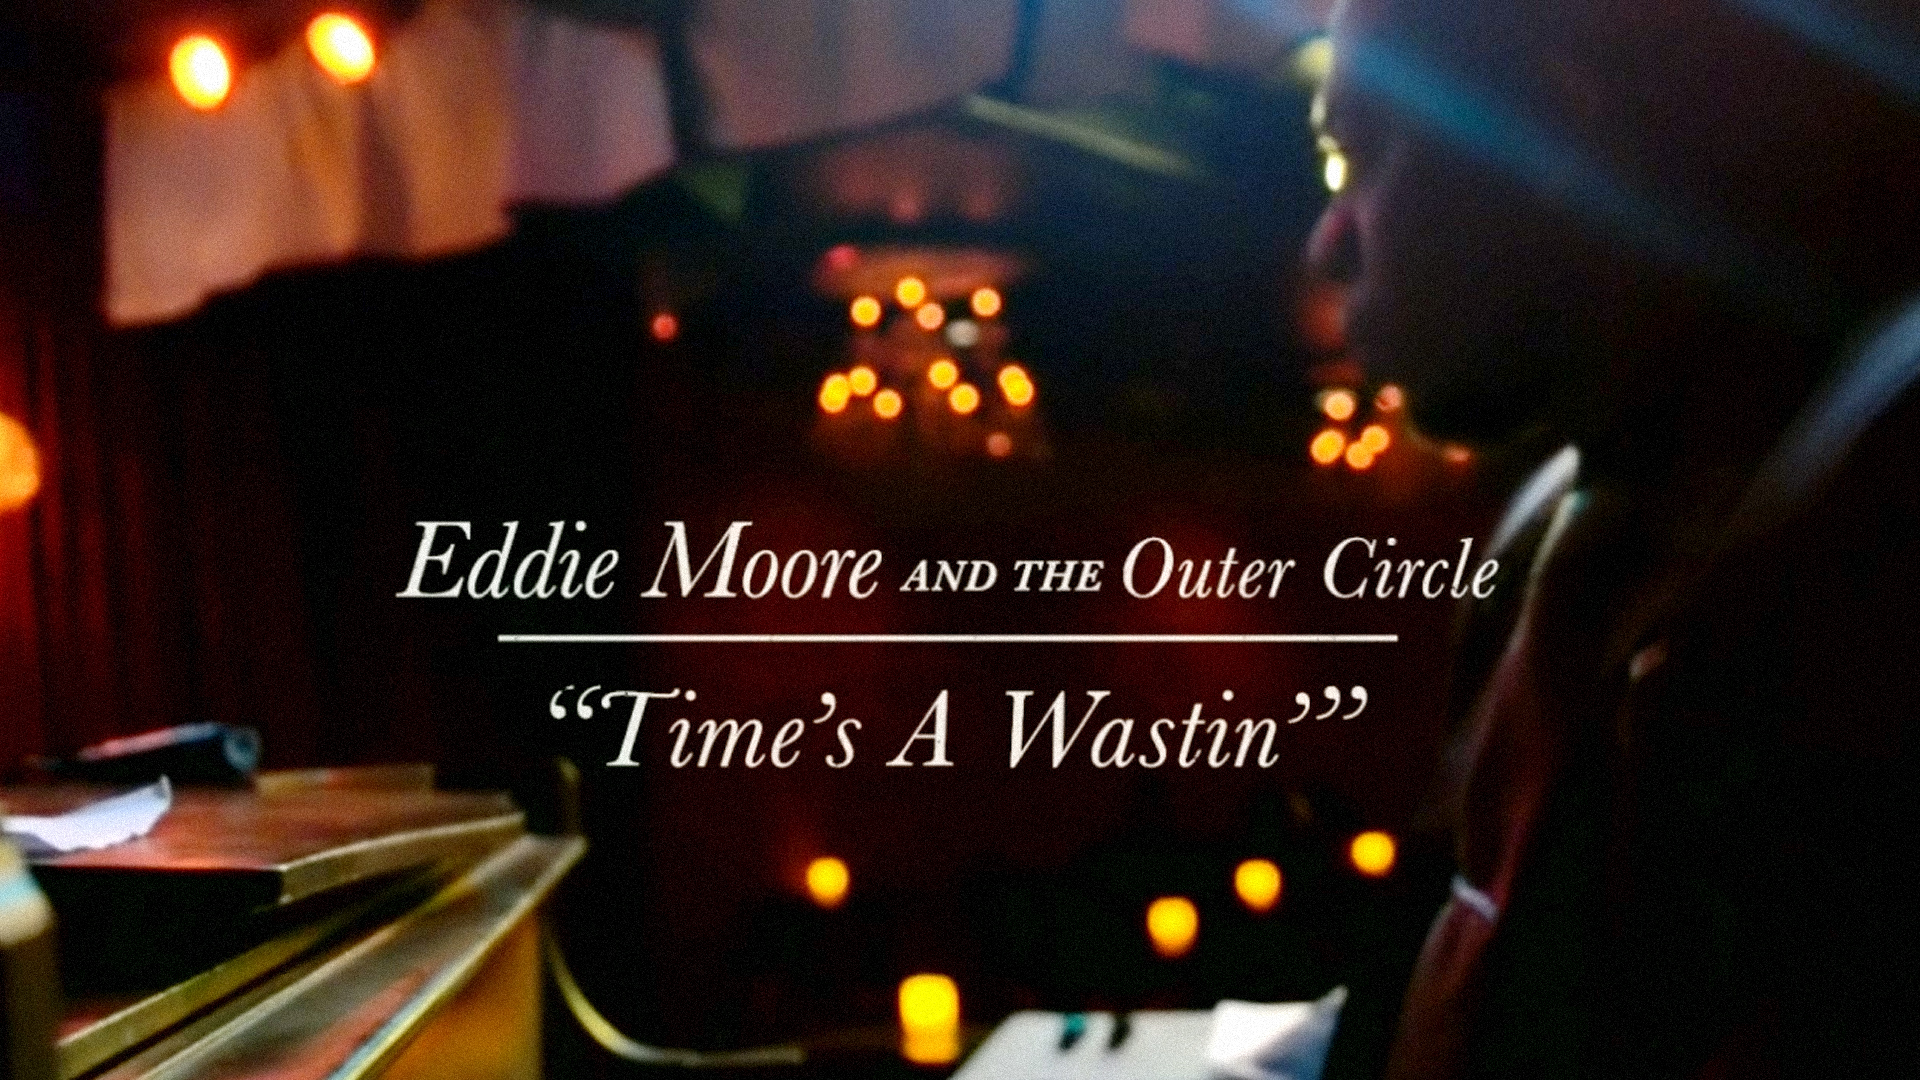 Eddie Moore and the Outer Circle “Time’s A Wastin'”